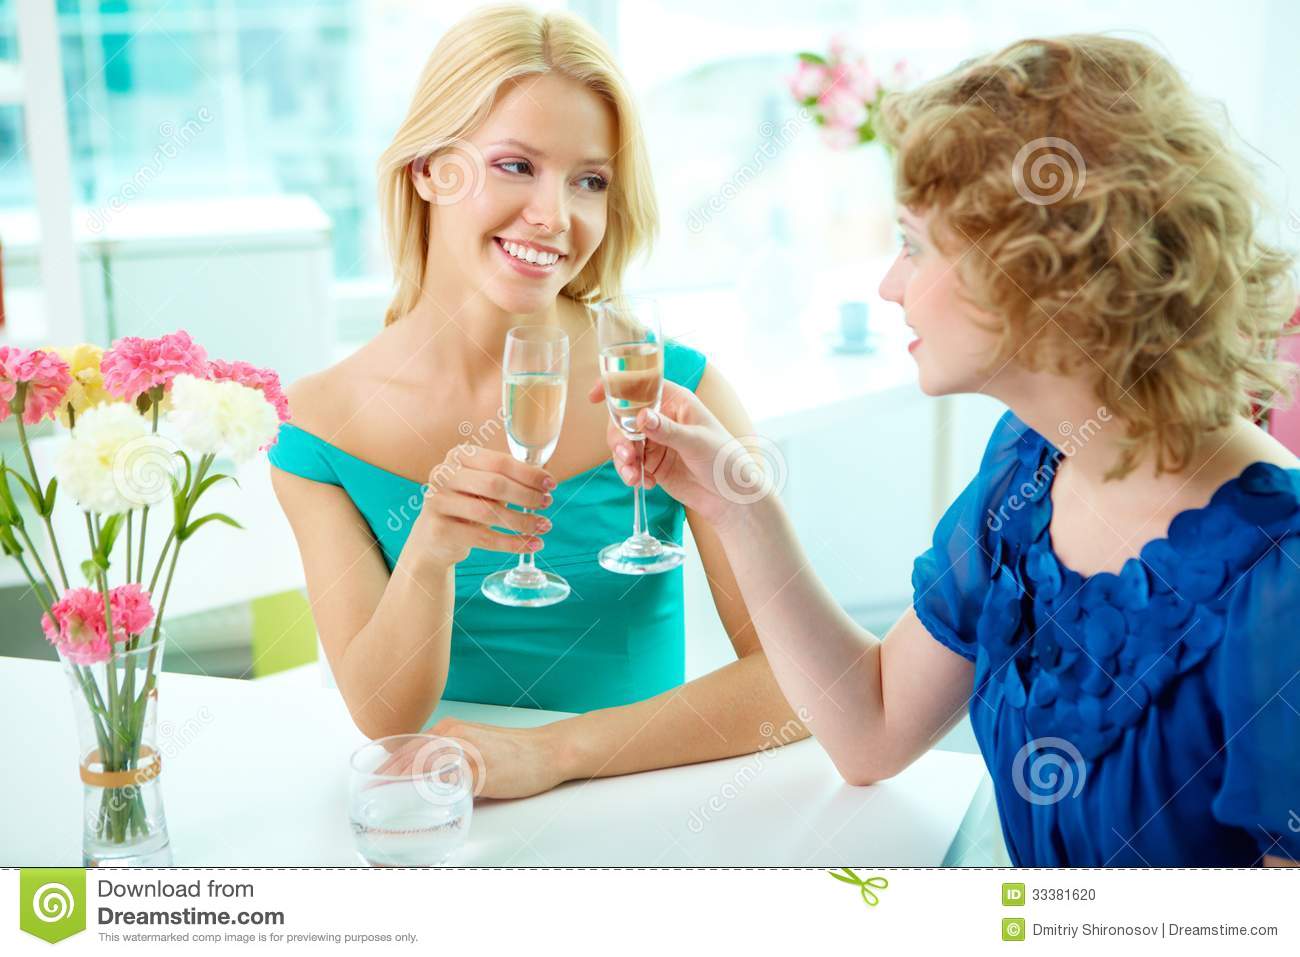 Gorgeous Girls Drinking Alcohol On Some Occasion 